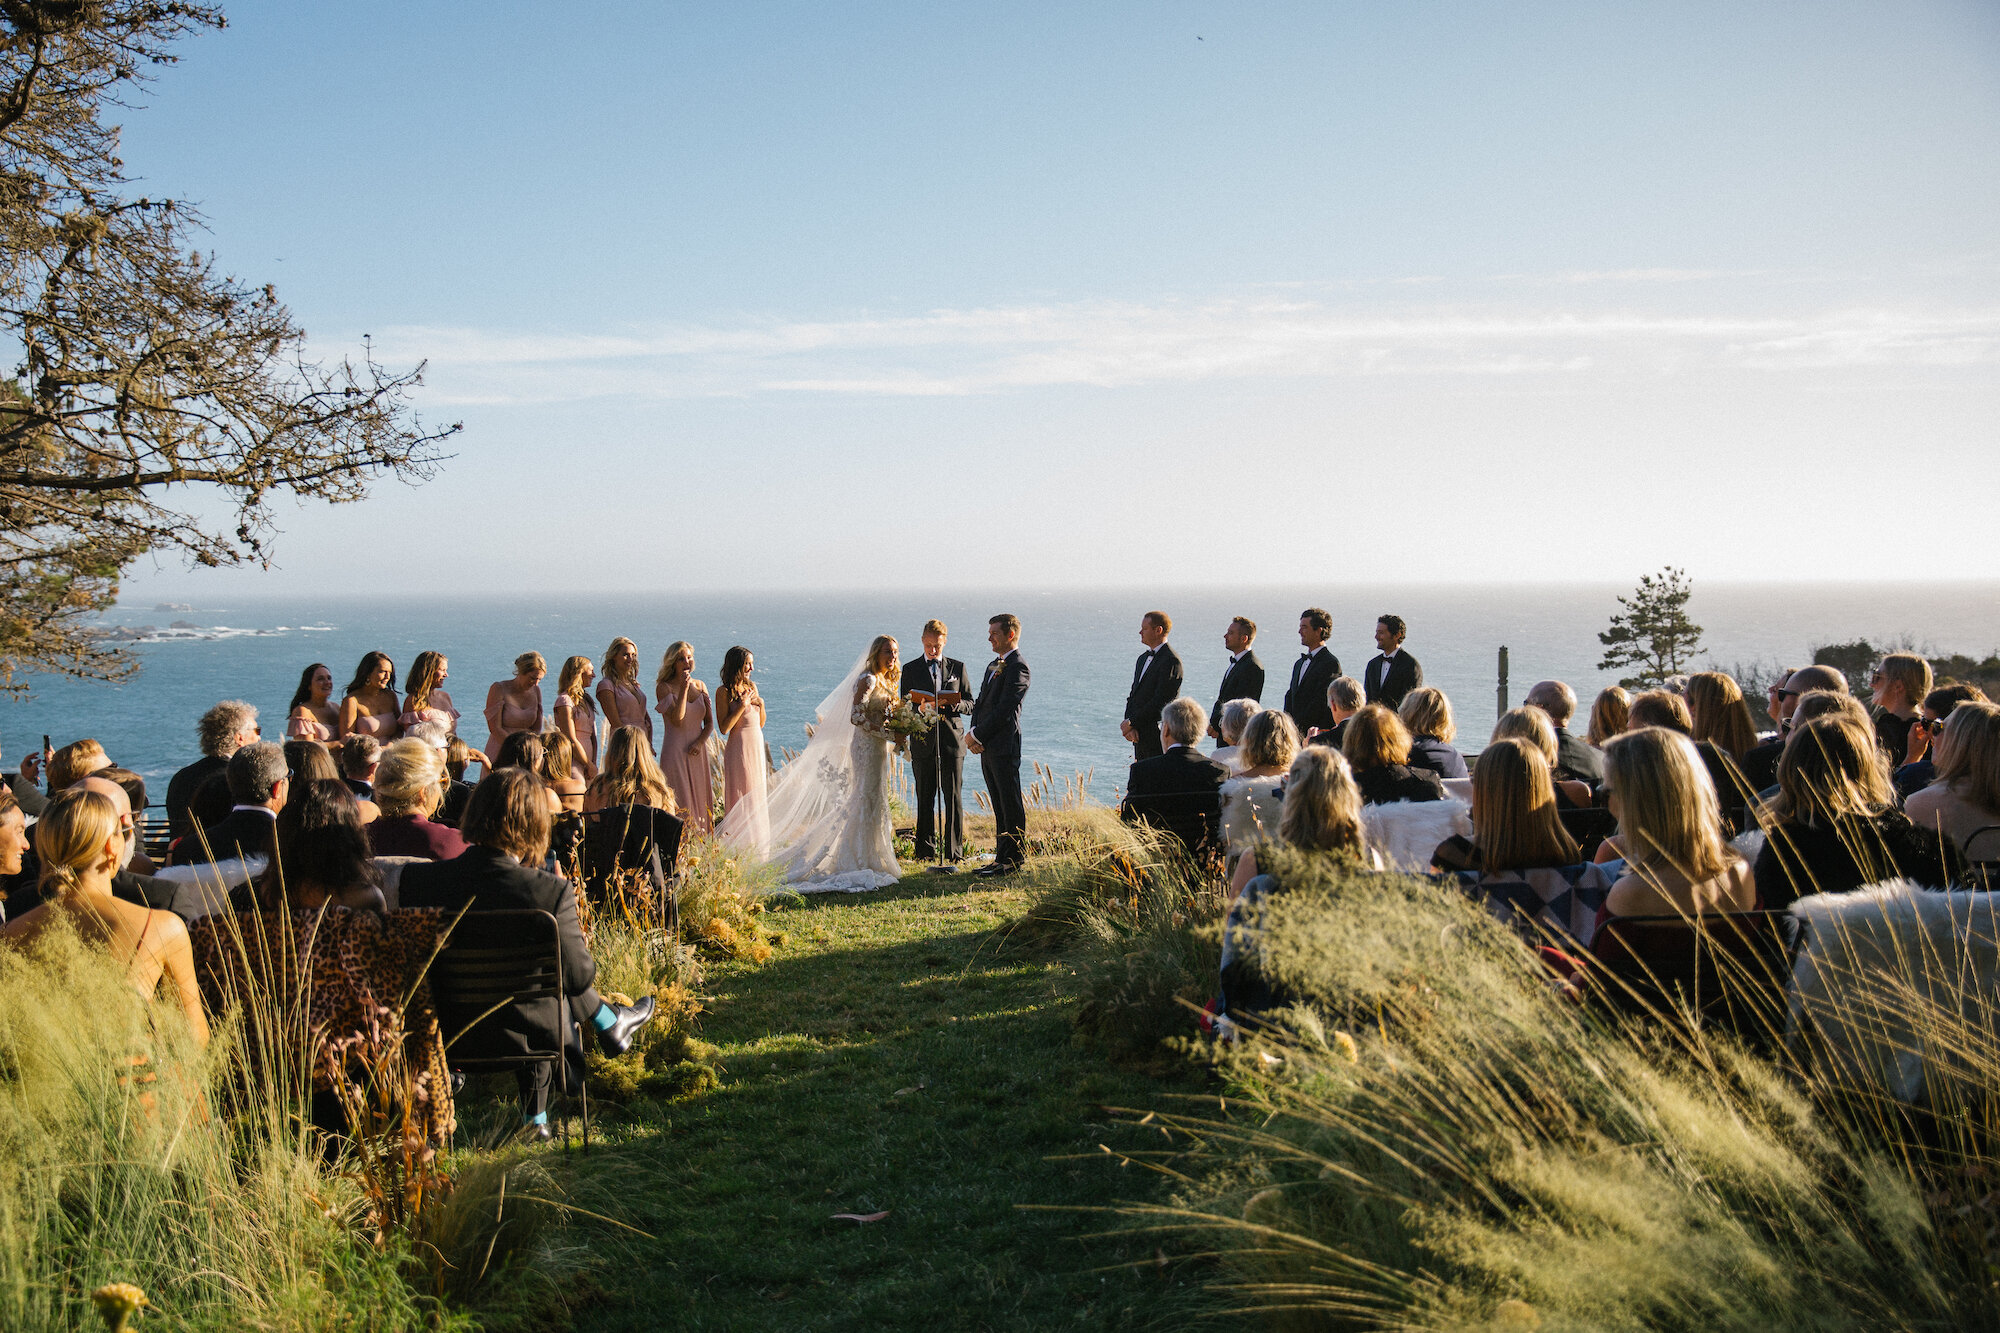  When the California coast is the ultimate altar vista, redirect your floral treatment to the aisle. An immersive aisle grass installation swayed gently with the breeze.     Photo by Jesse Leak. Event Design by Bash Please. 